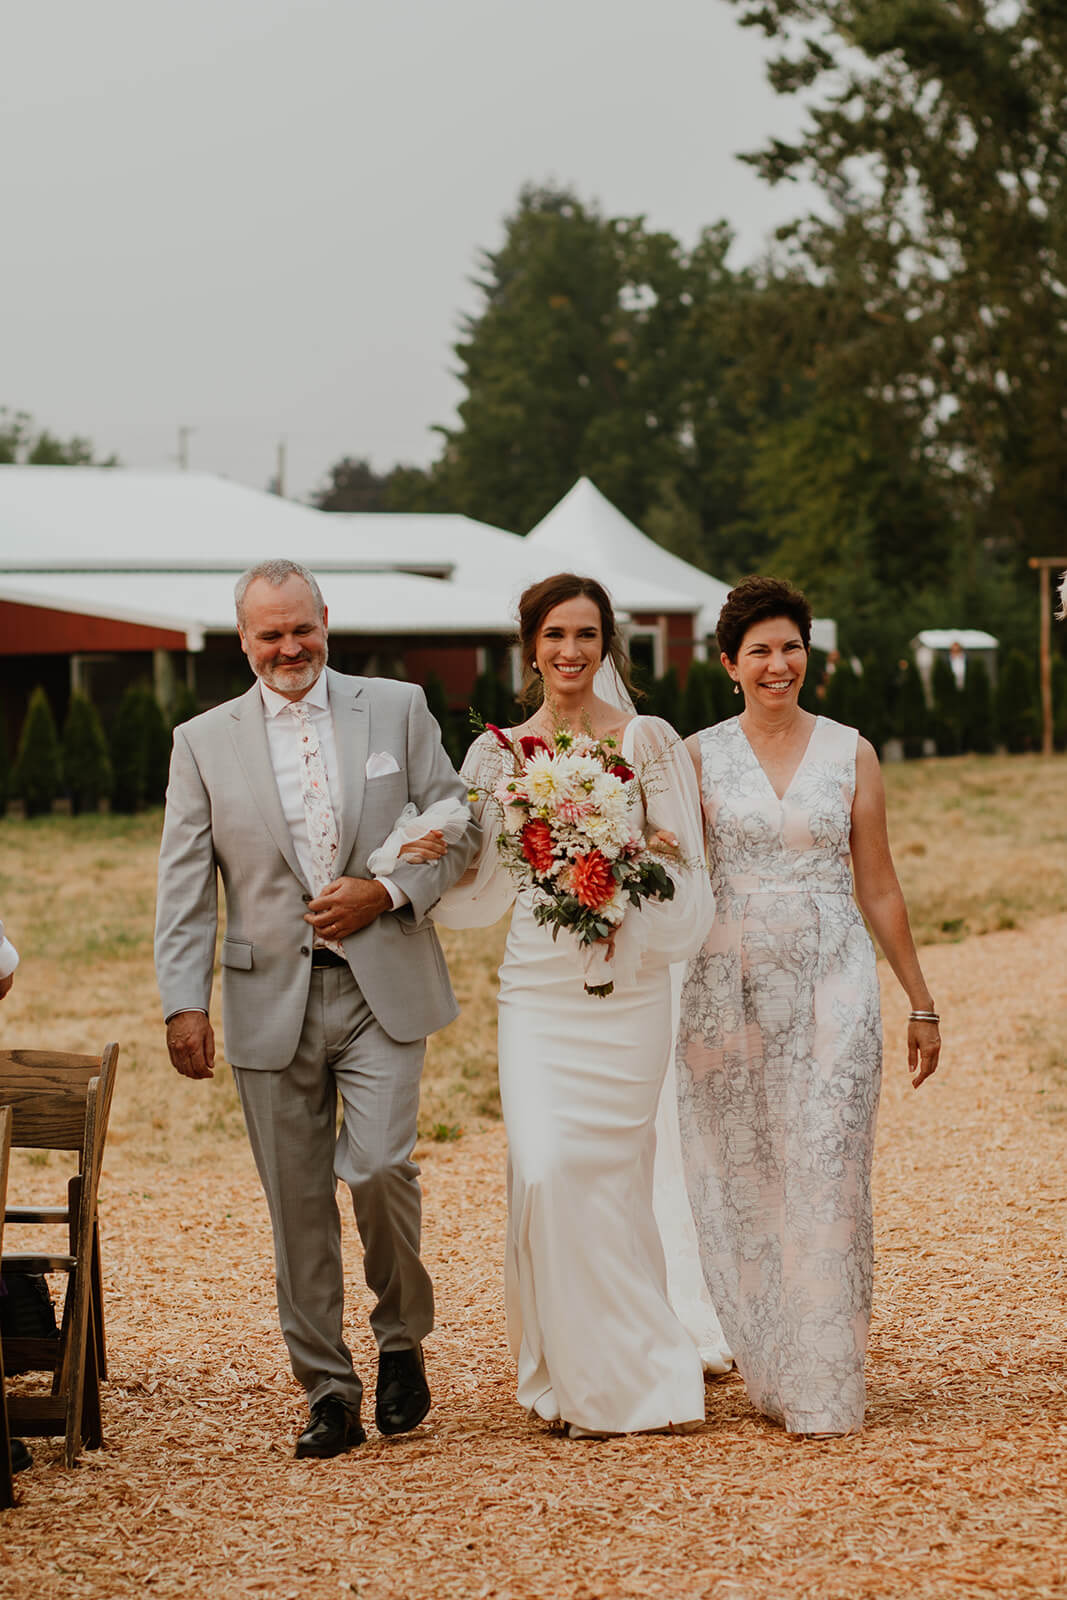 Bride walking with parents down the wedding aisle at Oregon family farm